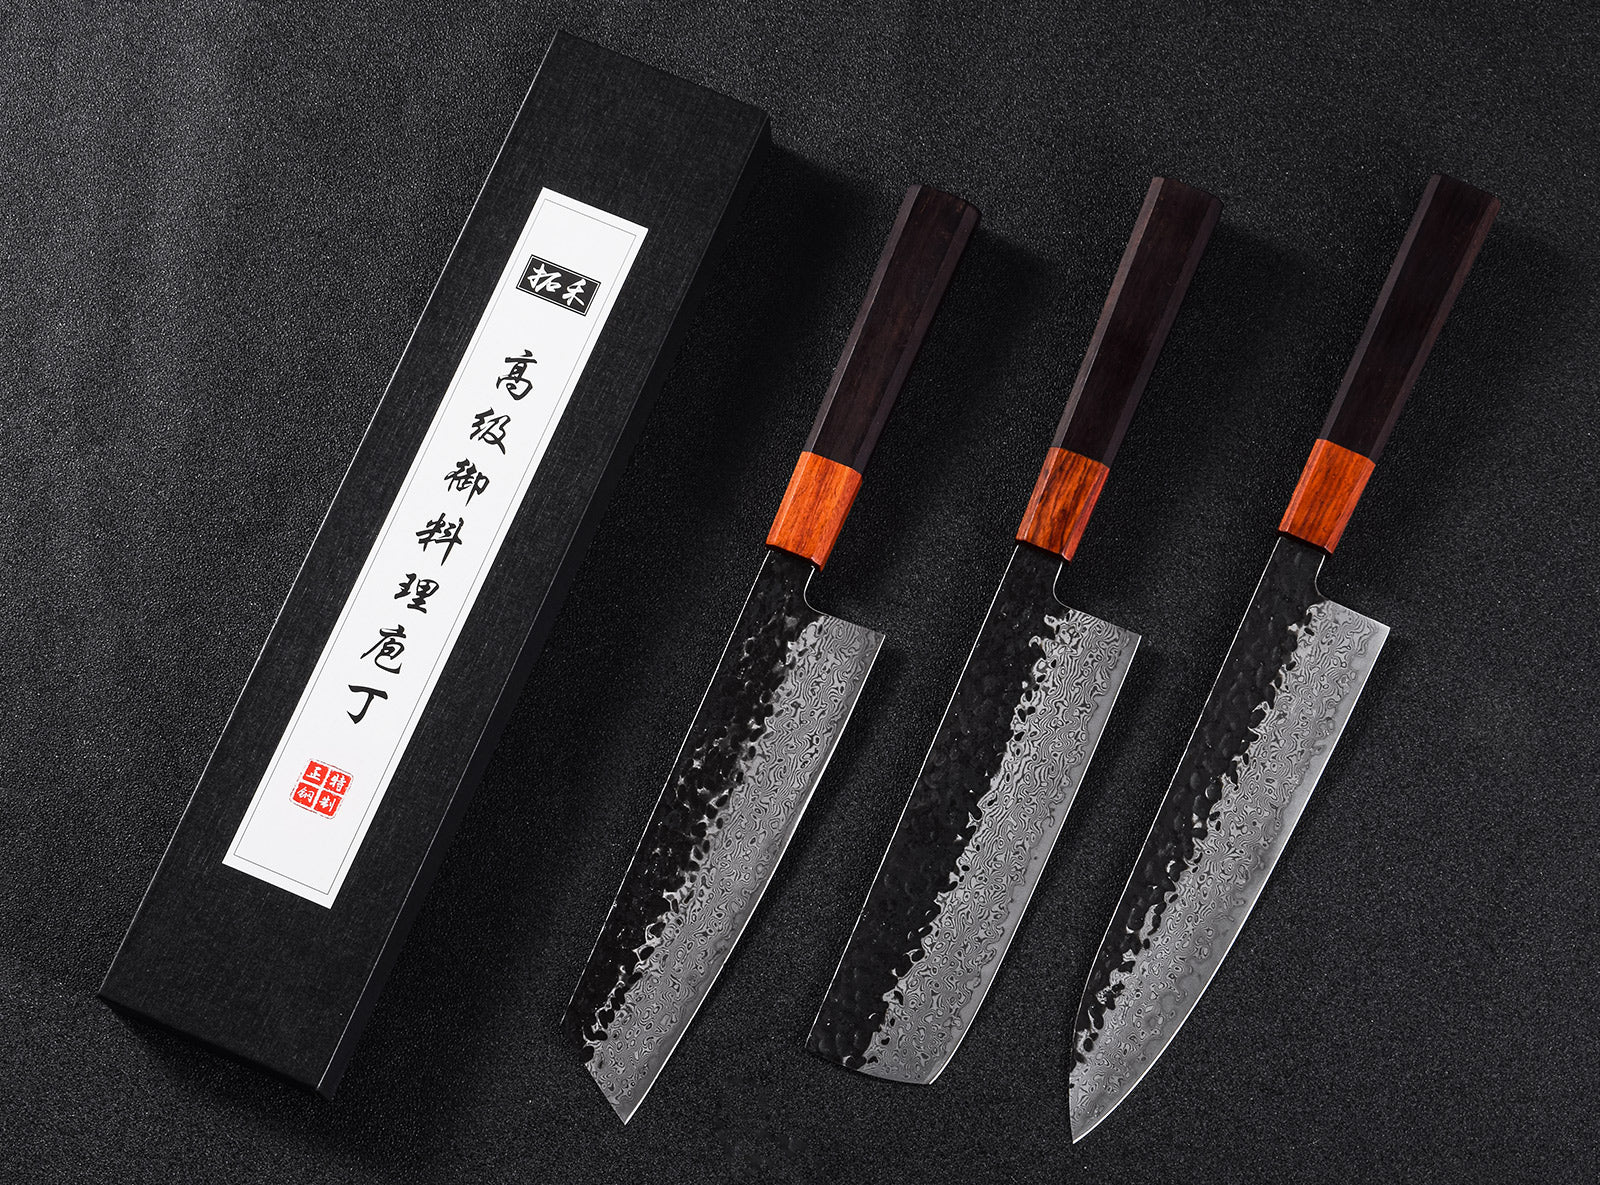 This knife shape may not seem as familiar as chef’s knives or slicers, but it’s known in Japan as a Nakiri knife, and is used for cutting vegetables. This one has 16 layers of steel over a core metal, with a hammered surface that looks stunning and helps keep foods from sticking to the blade as you work.  Unlike chef’s knives, this has a flat cutting edge, which means the entire length of the blade can make contact with the cutting surface at the same time. Because of that, it’s easier cut all the way through vegetables without leaving them attached to each other where the cut wasn’t finished.  While this is hand made in Japan and each is a one-of-a-kind creation, the handle is Western style and made from beautiful mahogany, so it will feel familiar and comfortable. This should be hand washed and dried, particularly if it’s used with acidic ingredients.